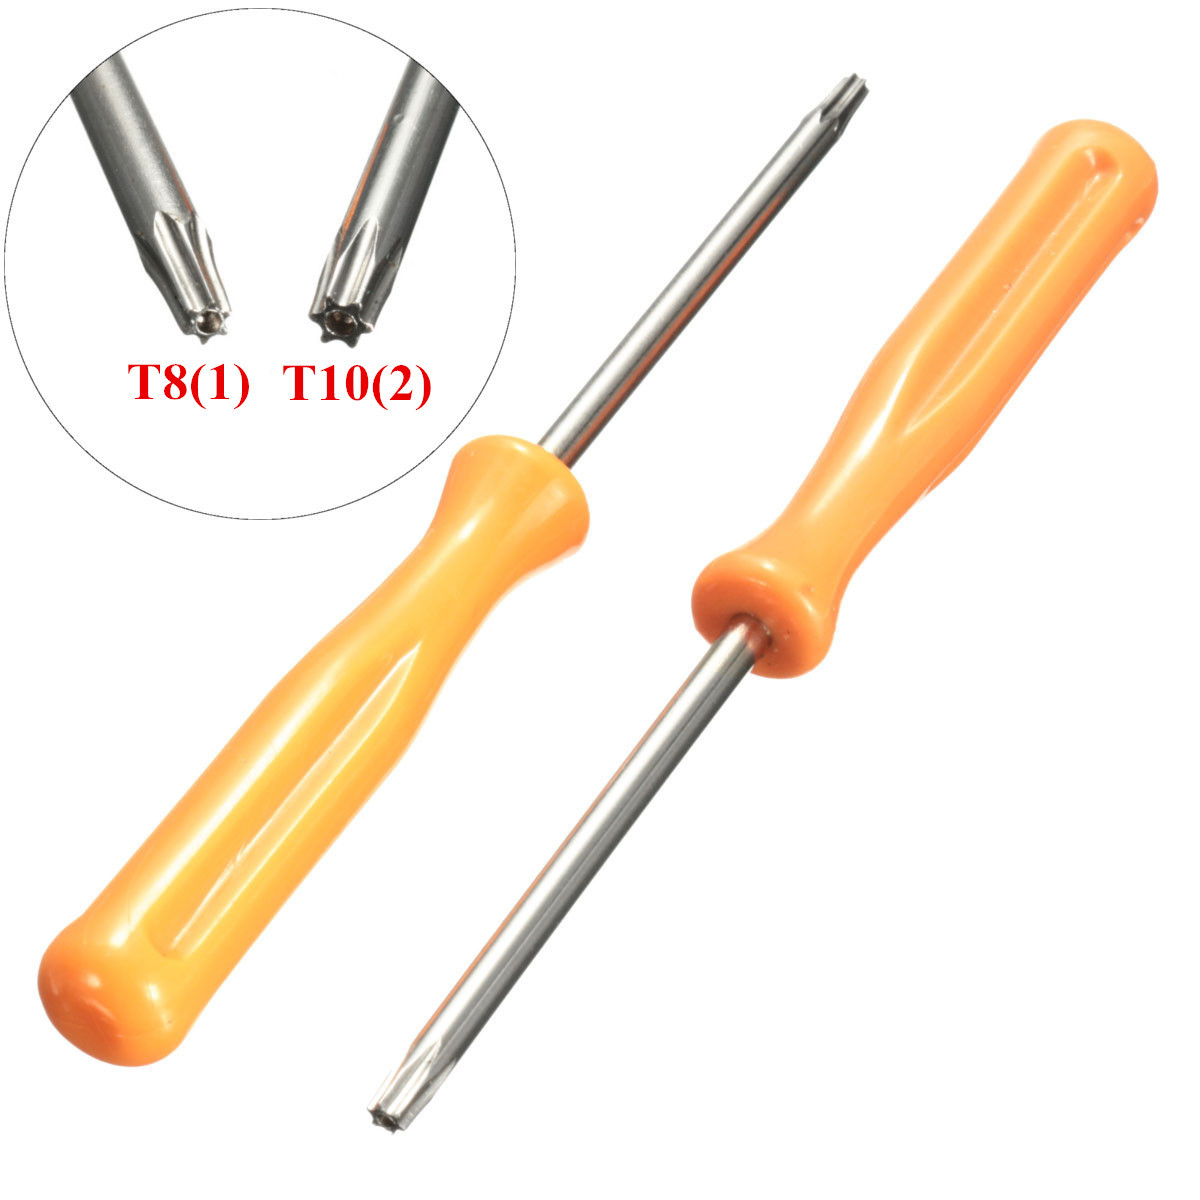 

Torx T8/T10 Security Screwdriver Tool for Xbox 360/PS3/PS4 Tamperproof Hole